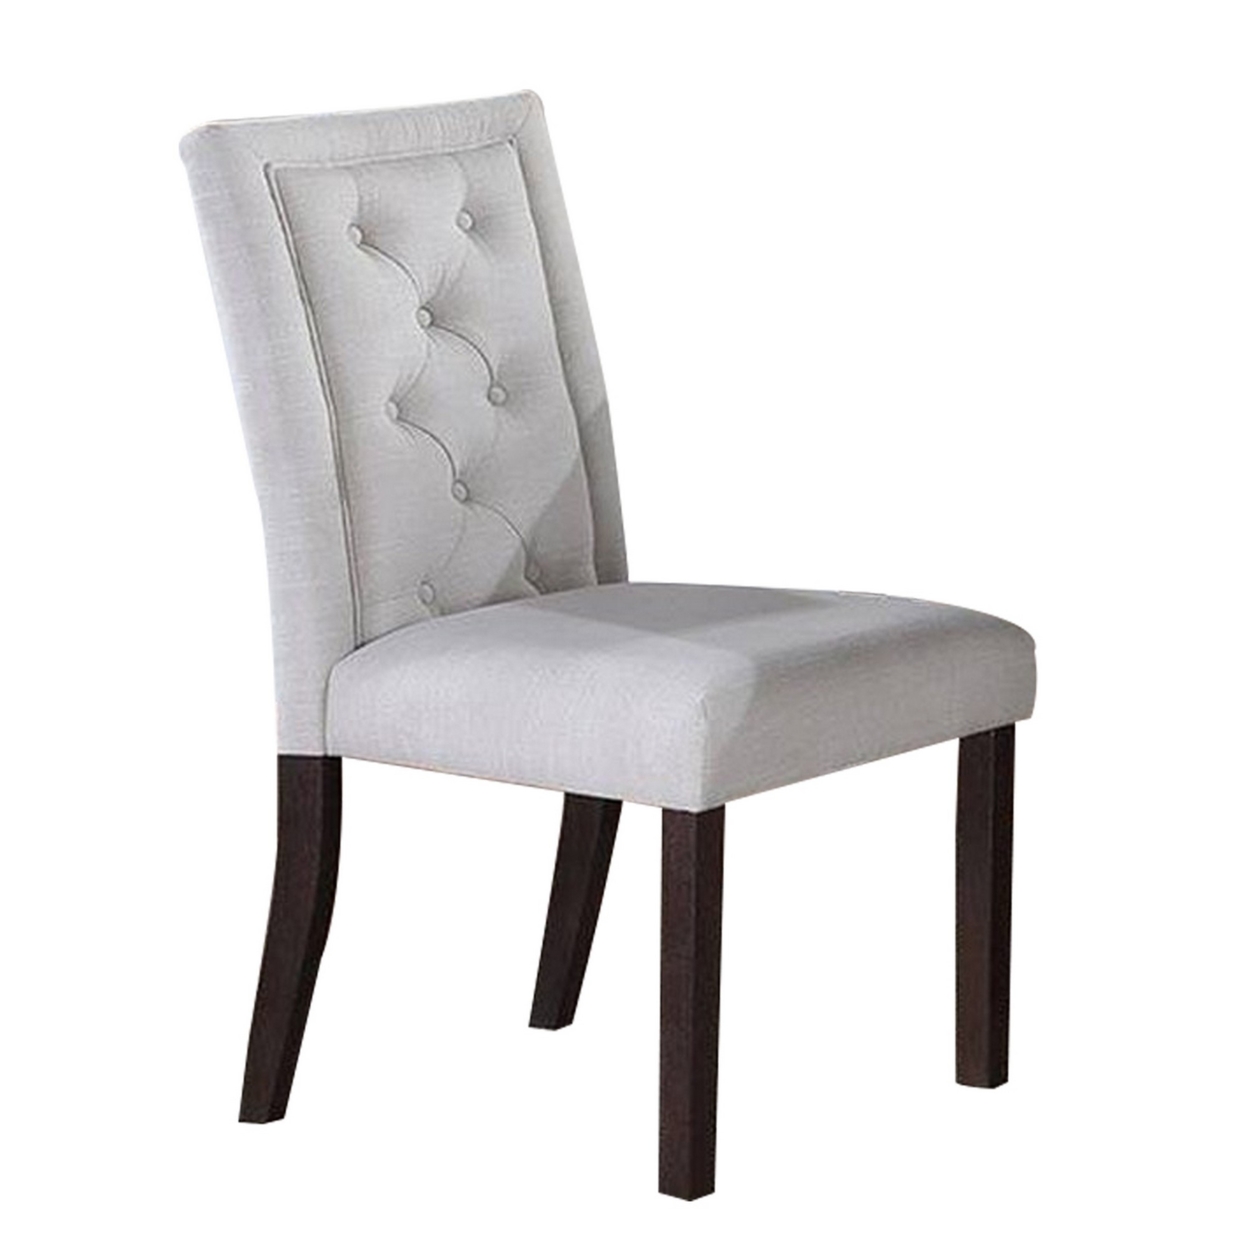 26 Inch Wood Dining Chair With Button Tufted Padded Back, Set Of 2, White